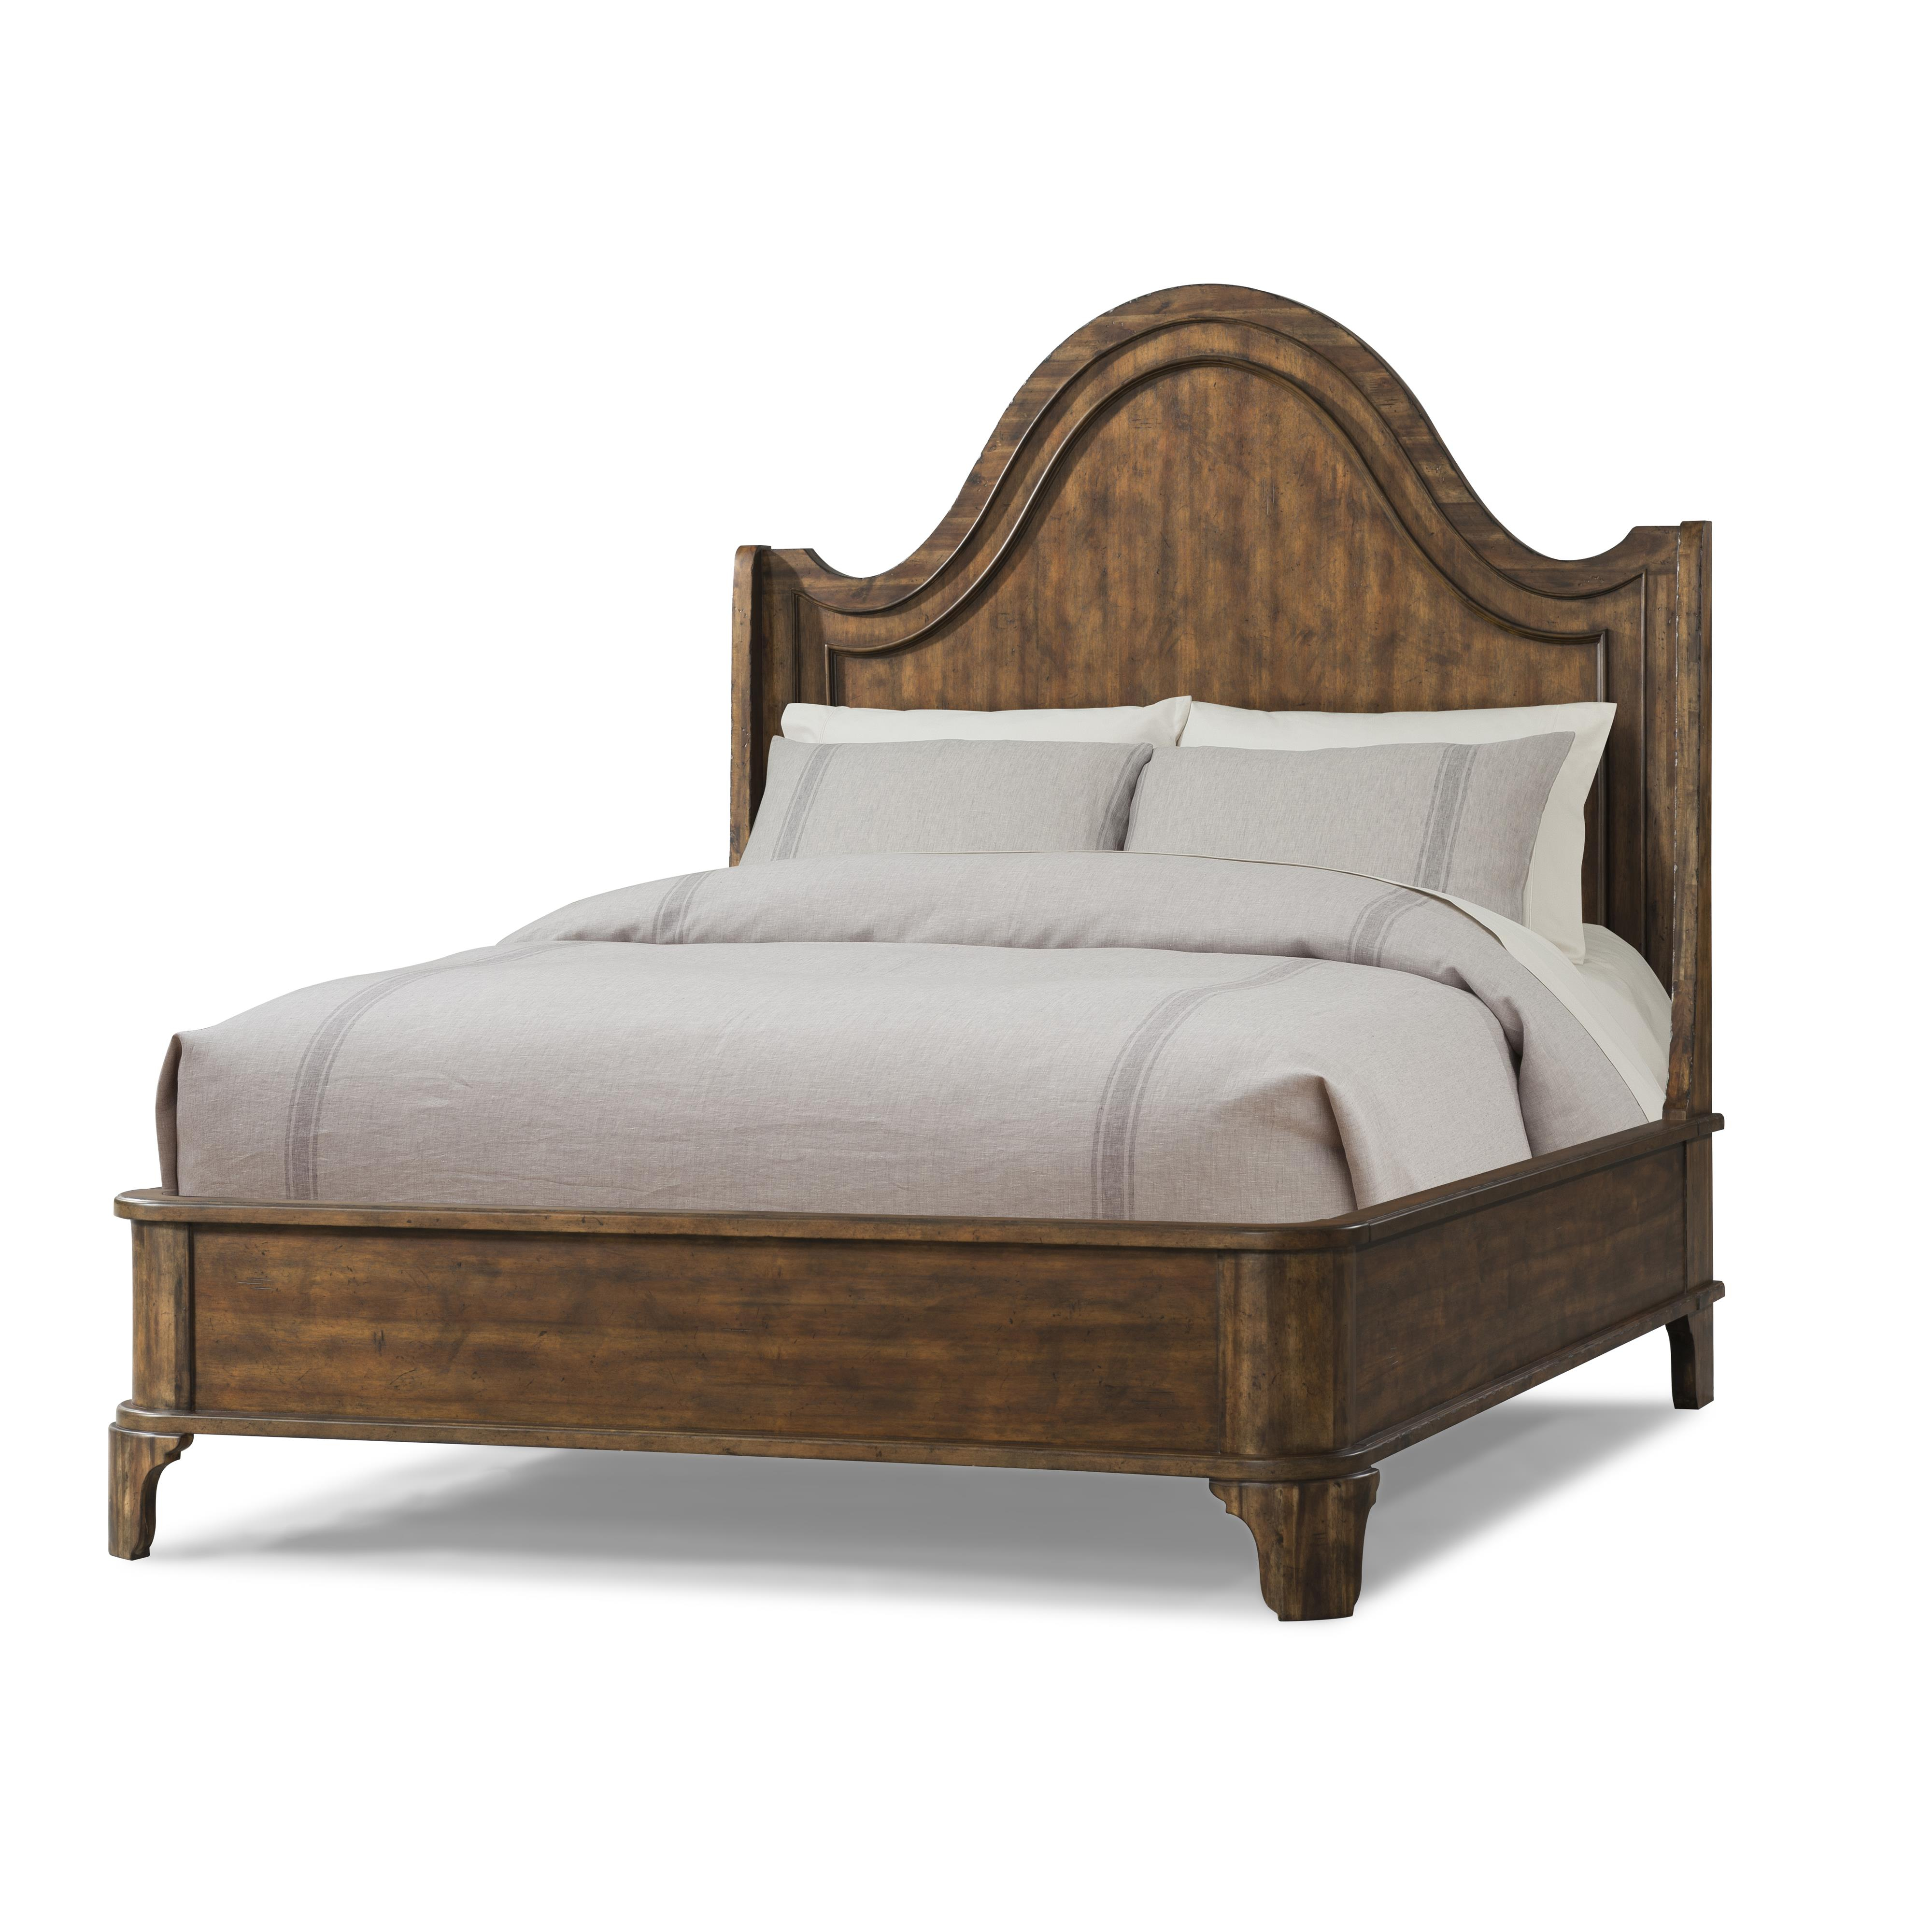 Trisha Yearwood Home Patricia Queen Shelter Bed Trisha Yearwood Home Collection Klaussner At Royal Furniture within proportions 4000 X 4000